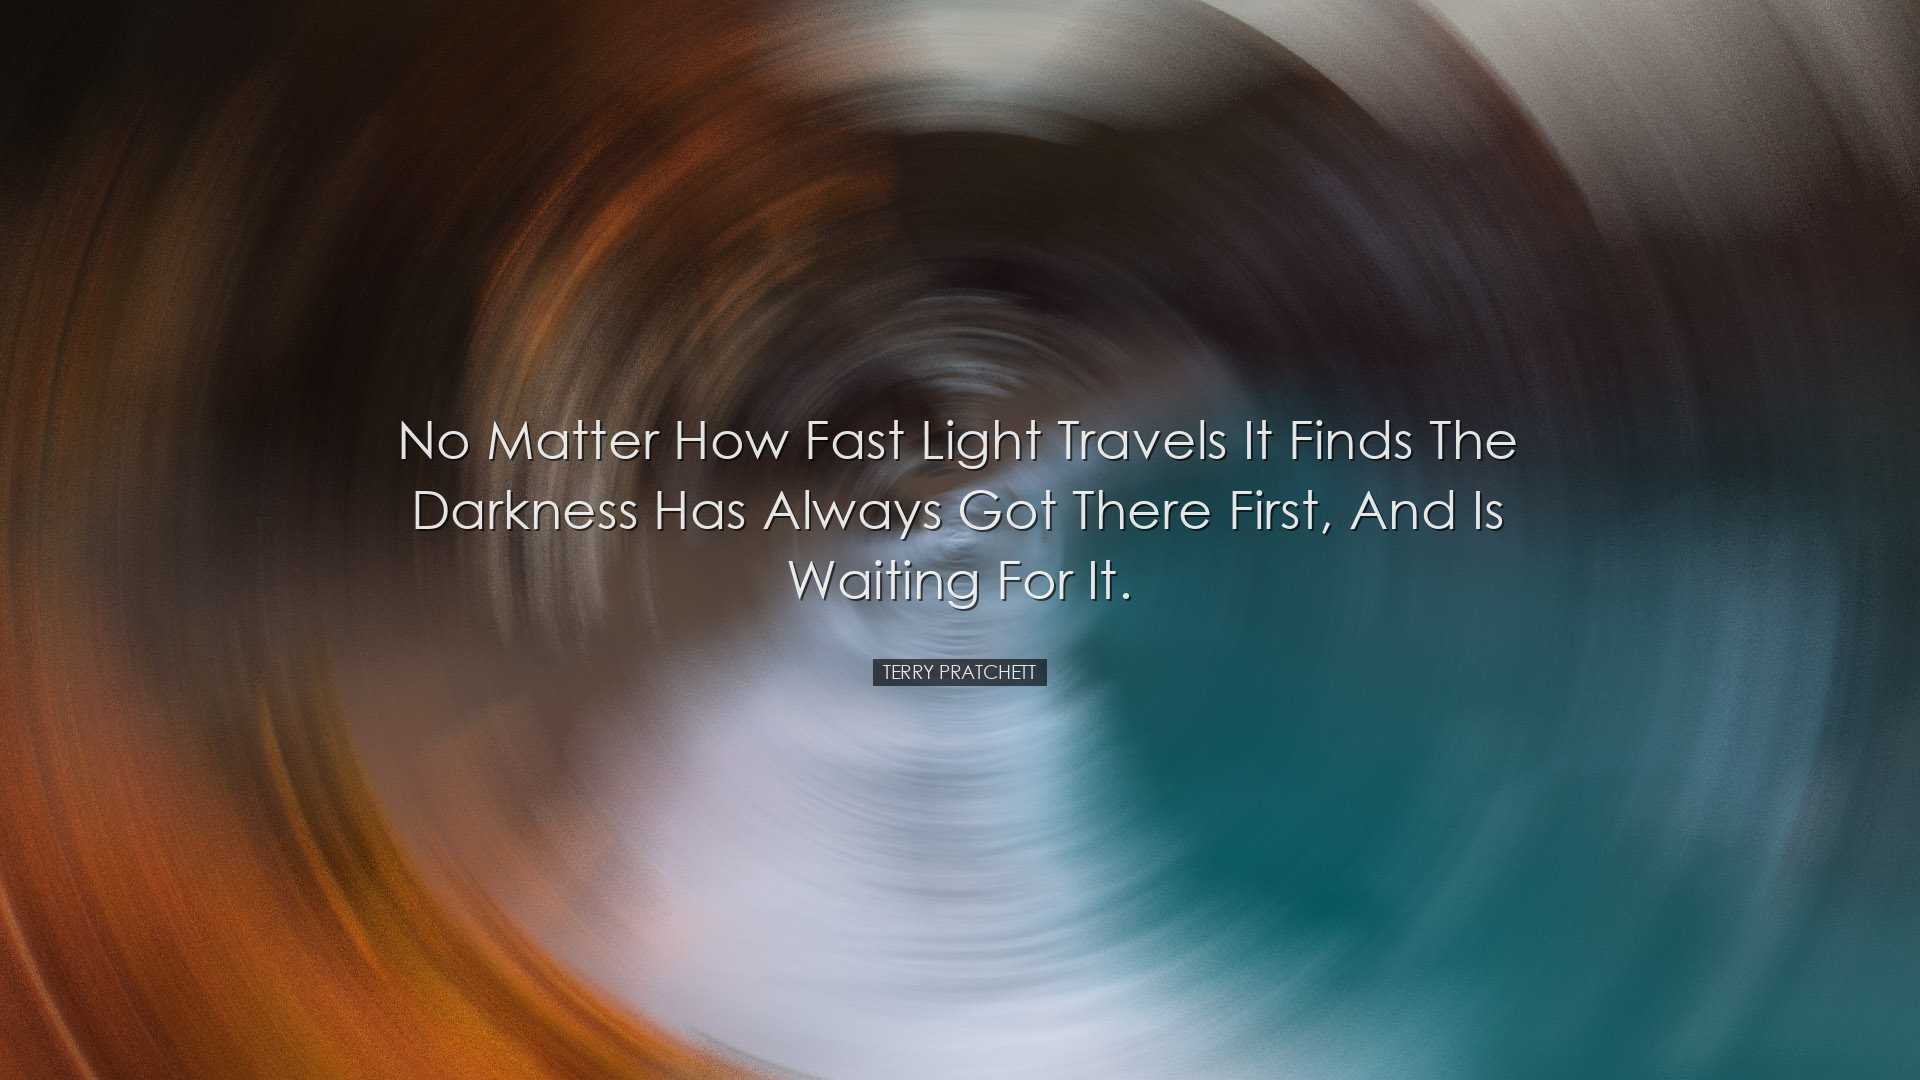 No matter how fast light travels it finds the darkness has always